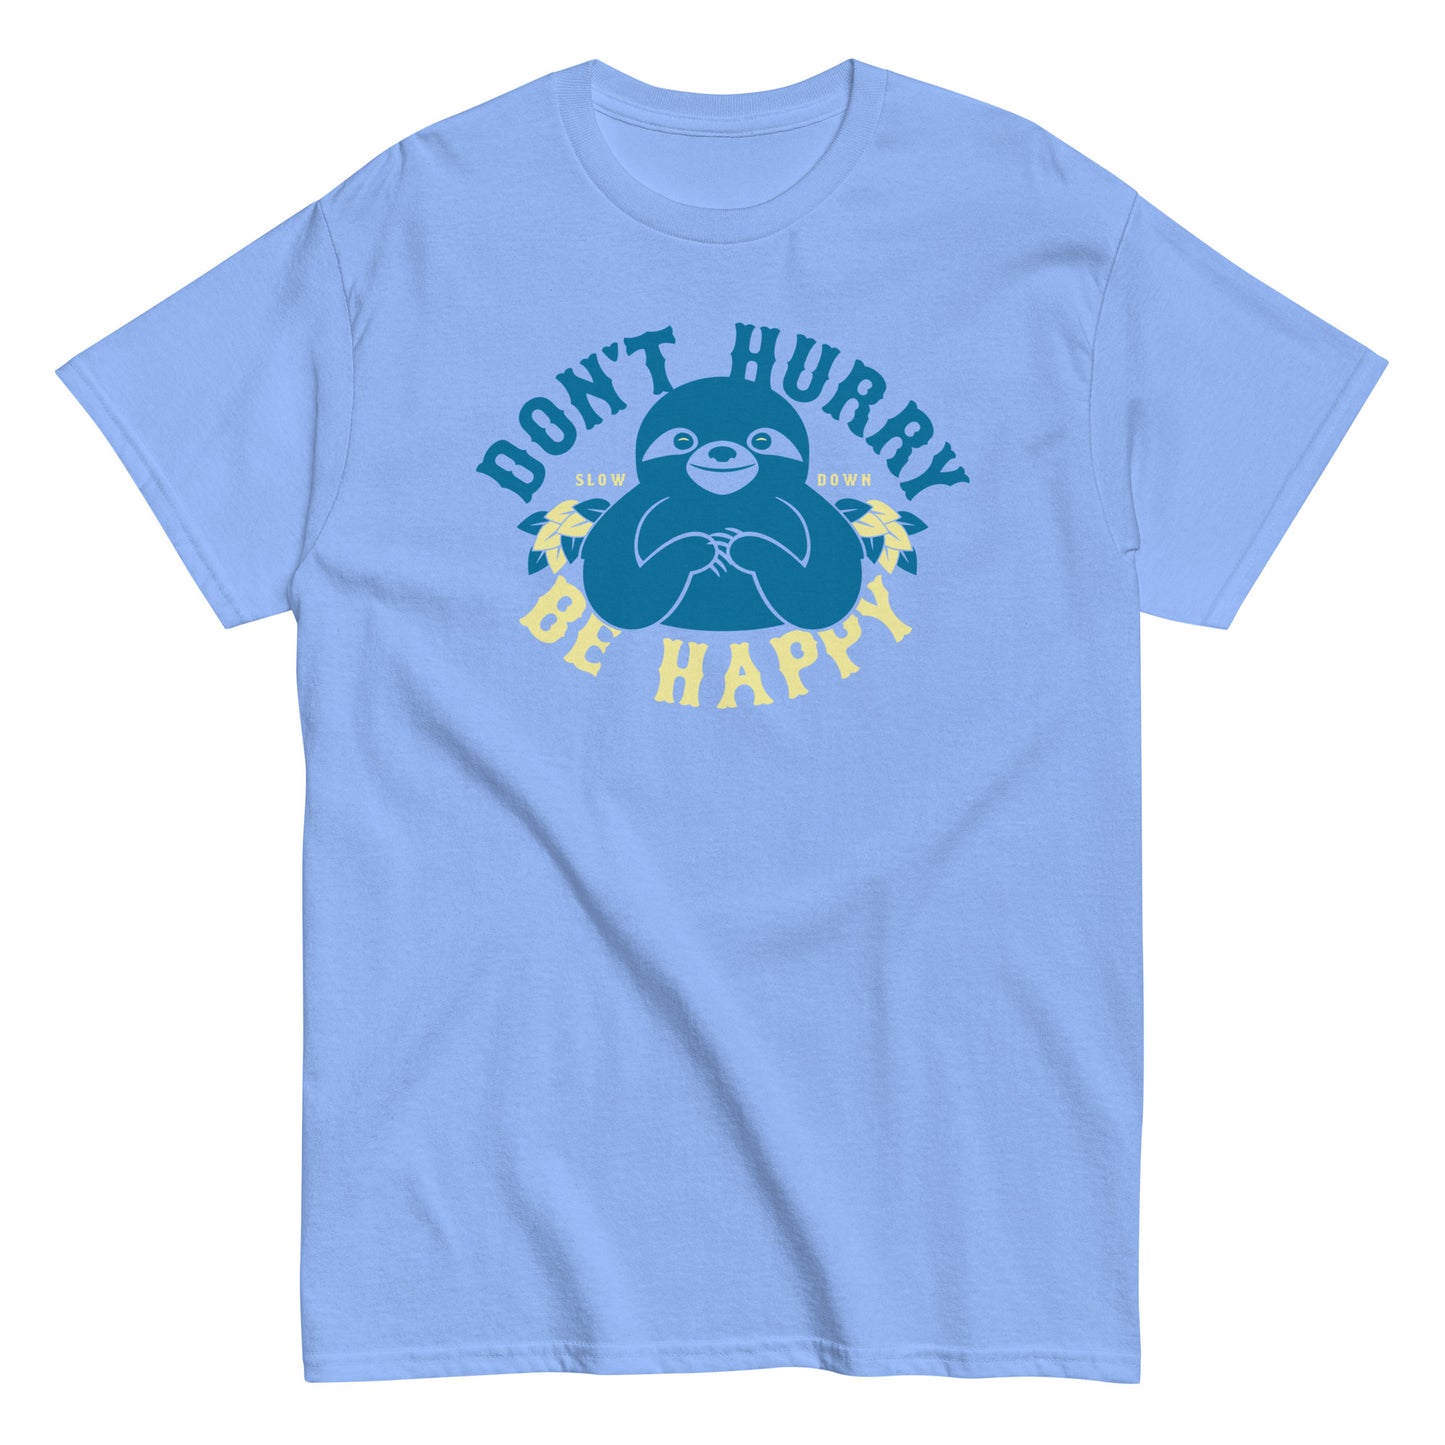 Don't Hurry Be Happy Men's Classic Tee